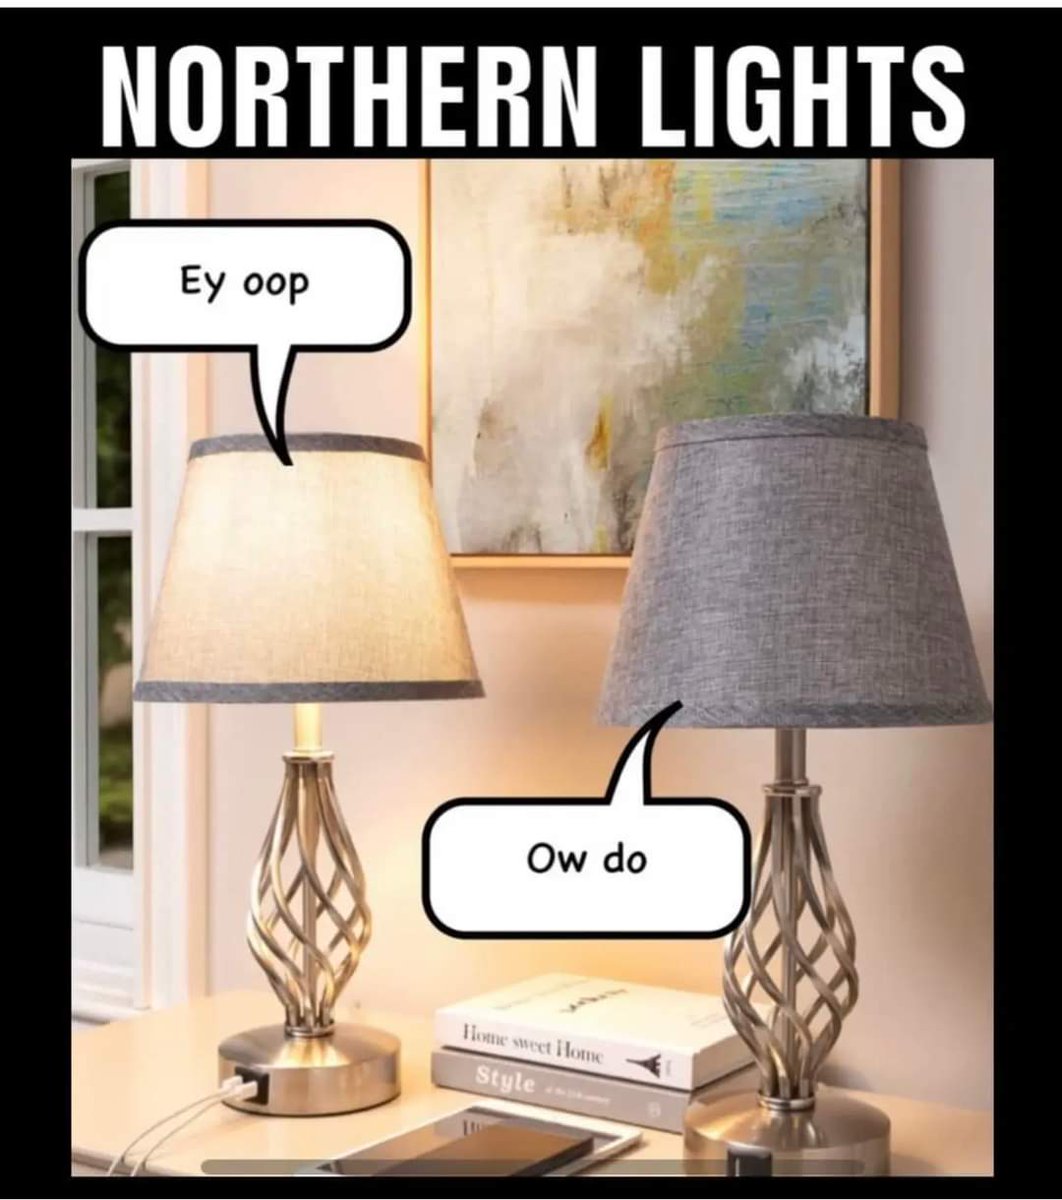 If you know you know! 😁 #NorthernLights